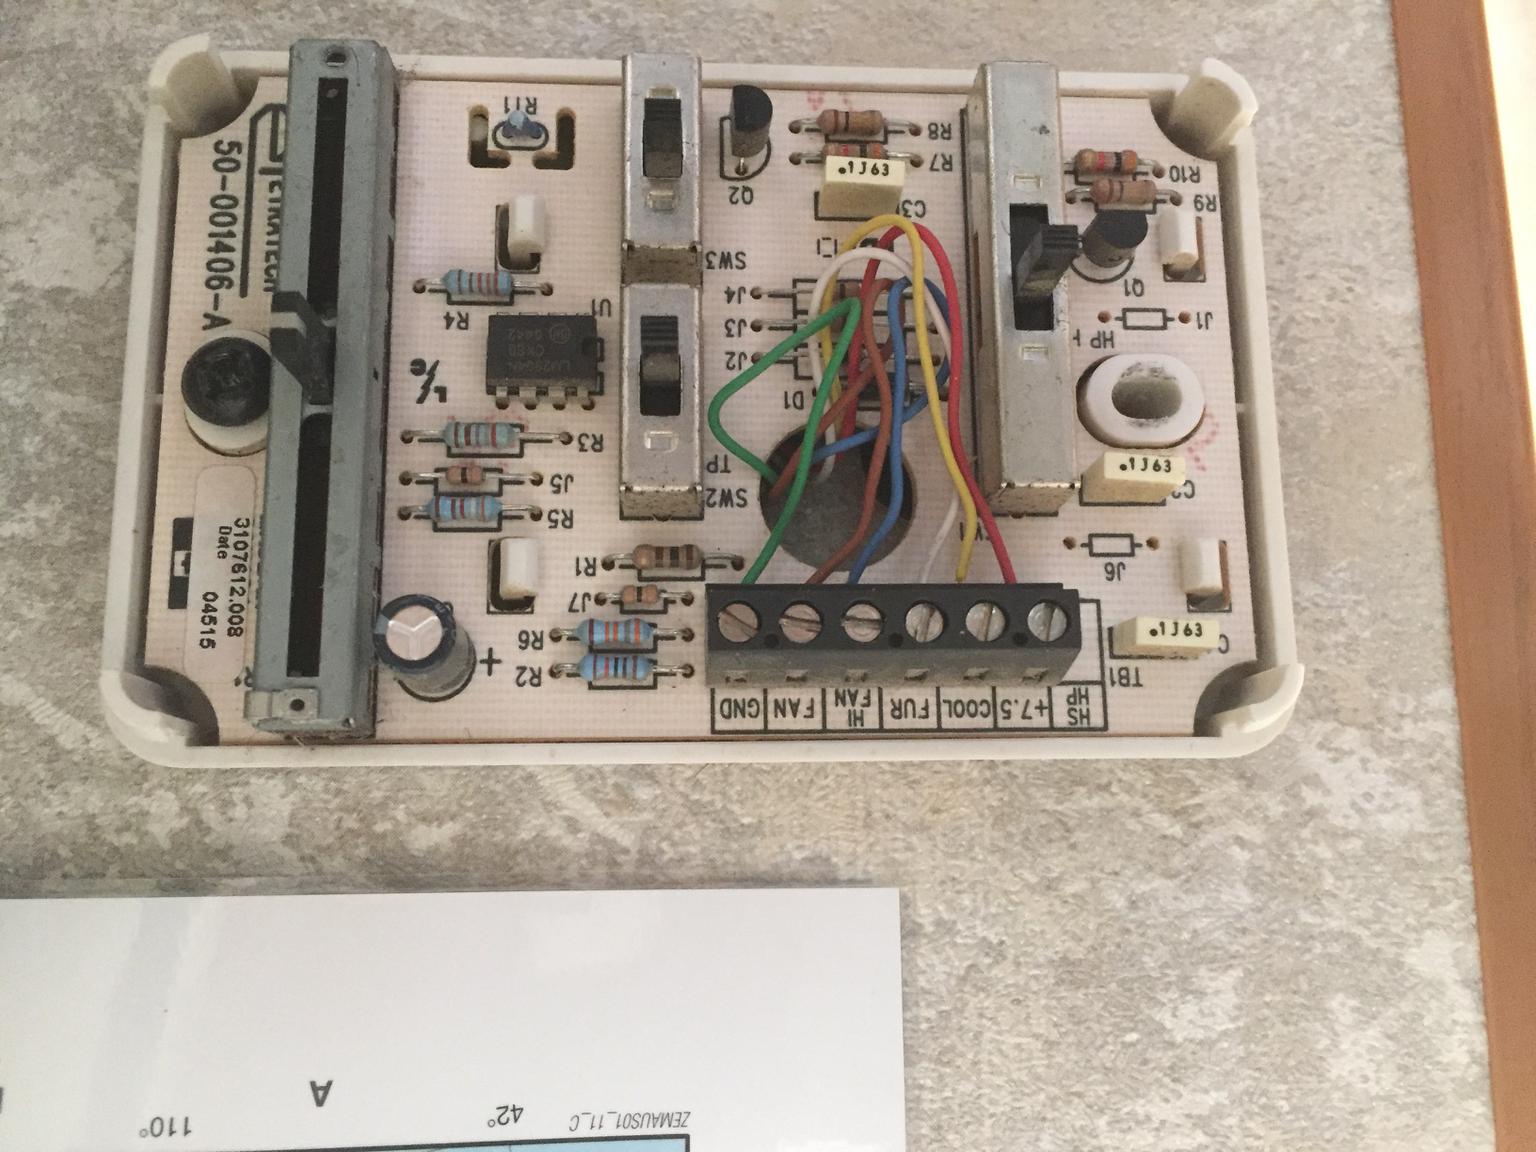 How Wire A Honeywell Room Thermostat Honeywell Thermostat Wiring Connection Tables Hook Up Procedures For Honeywell Brand Heating Heat Pump Or Air Conditioning Thermostats